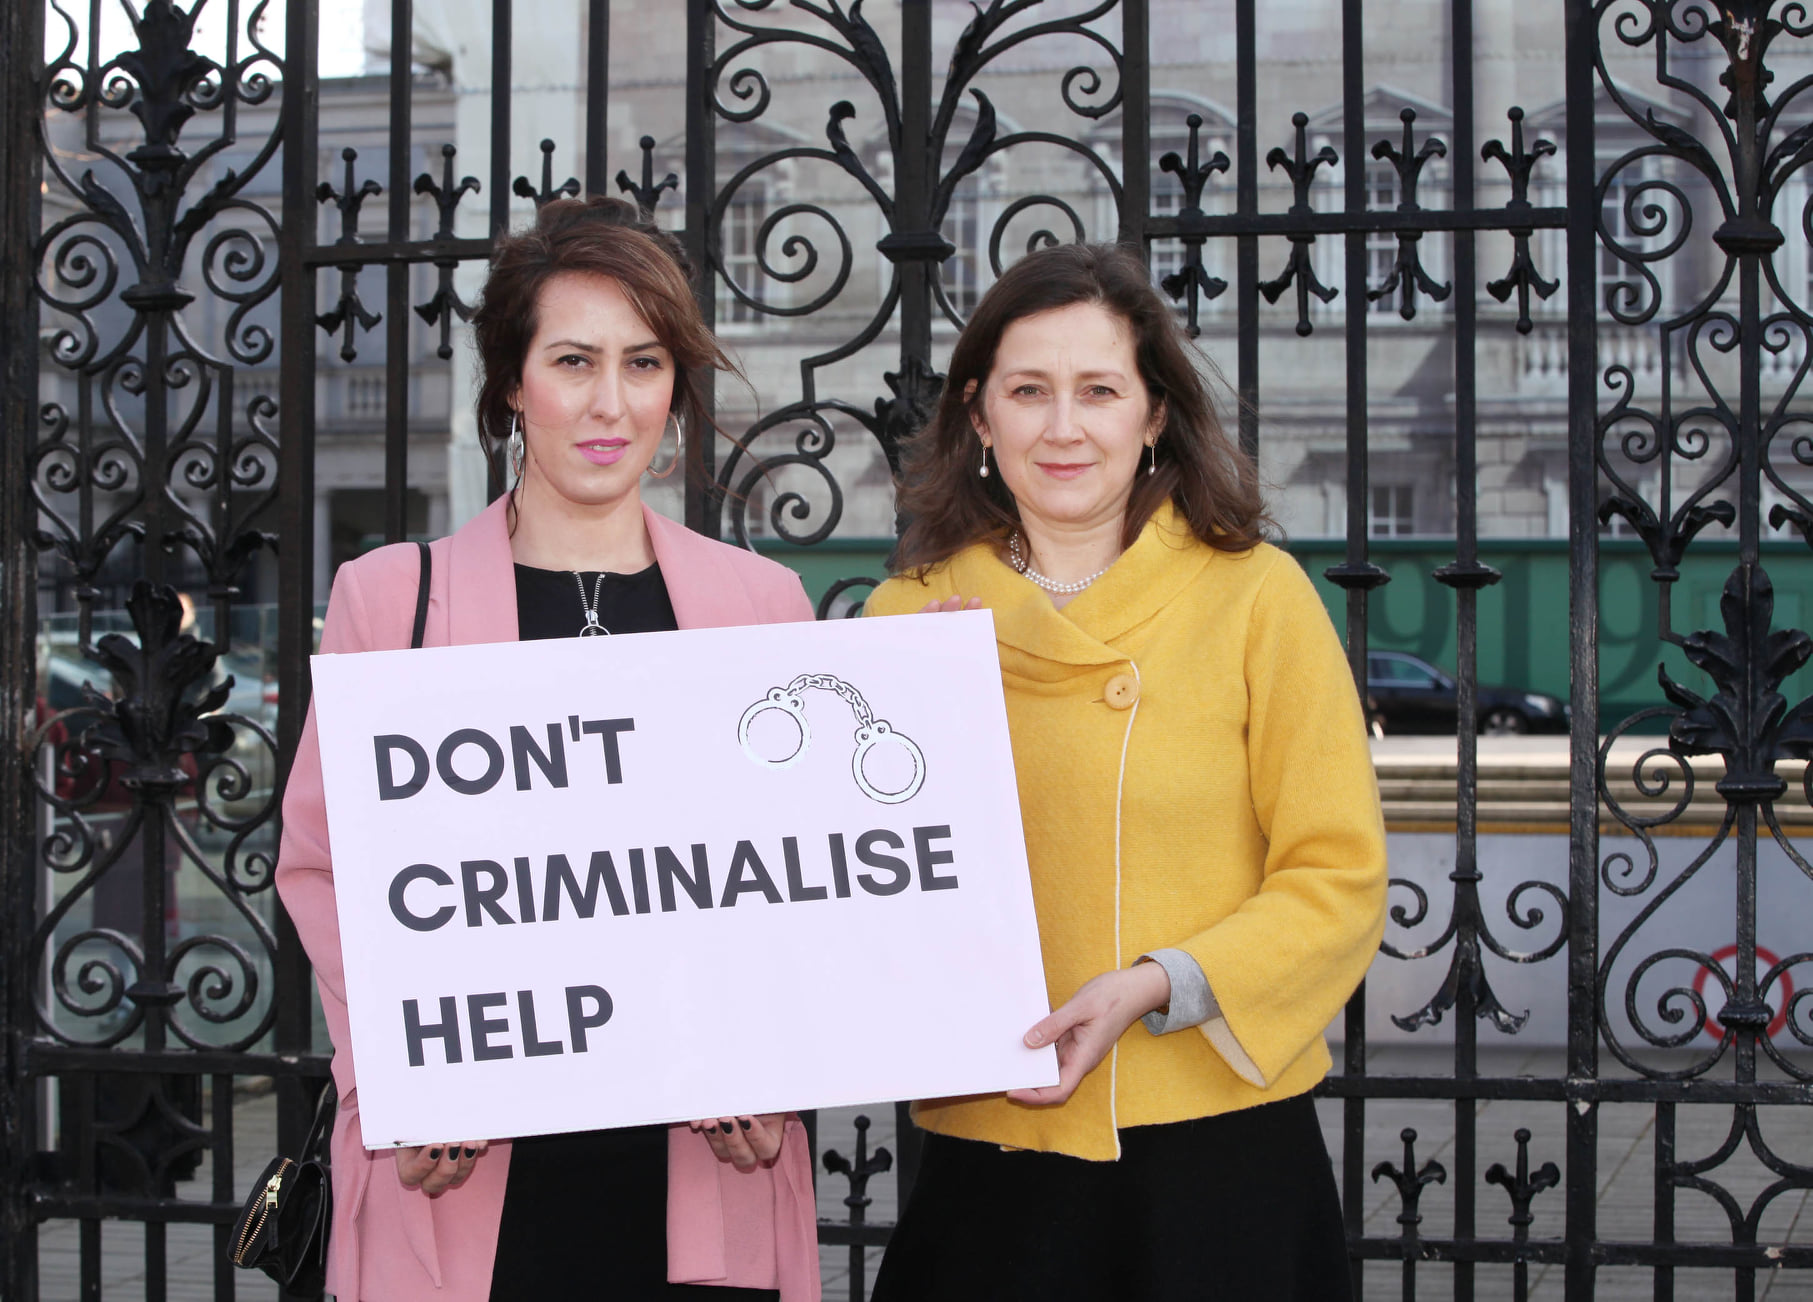 20.07.2021 – GOOD NEWS! The Minister for Health has indicated that there are NO plans to introduce censorship zones outside abortion facilities at this time.